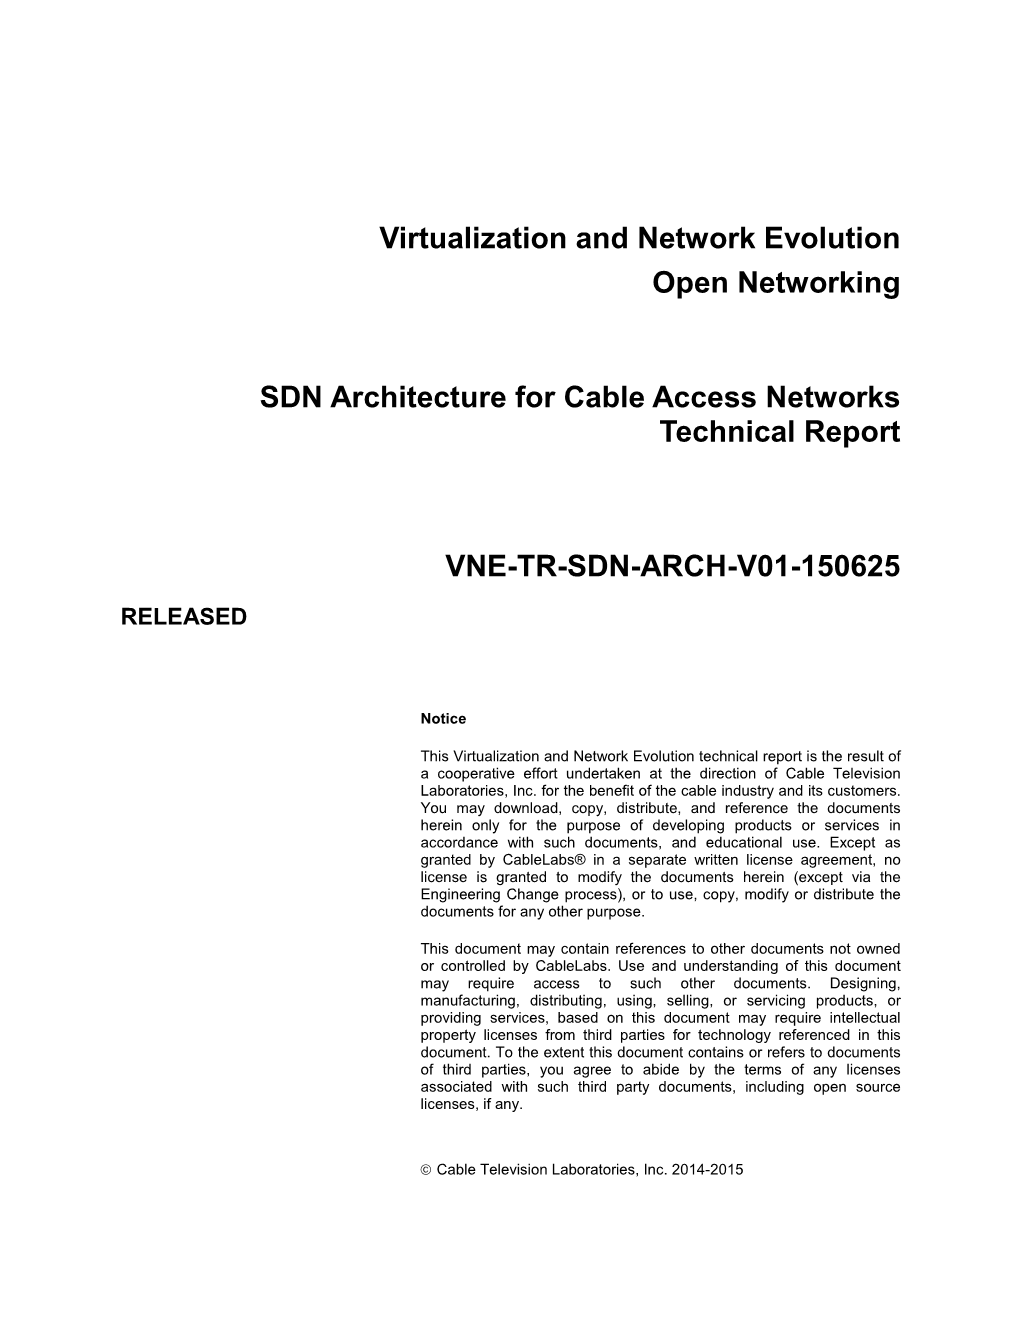 Virtualization and Network Evolution Open Networking SDN Architecture